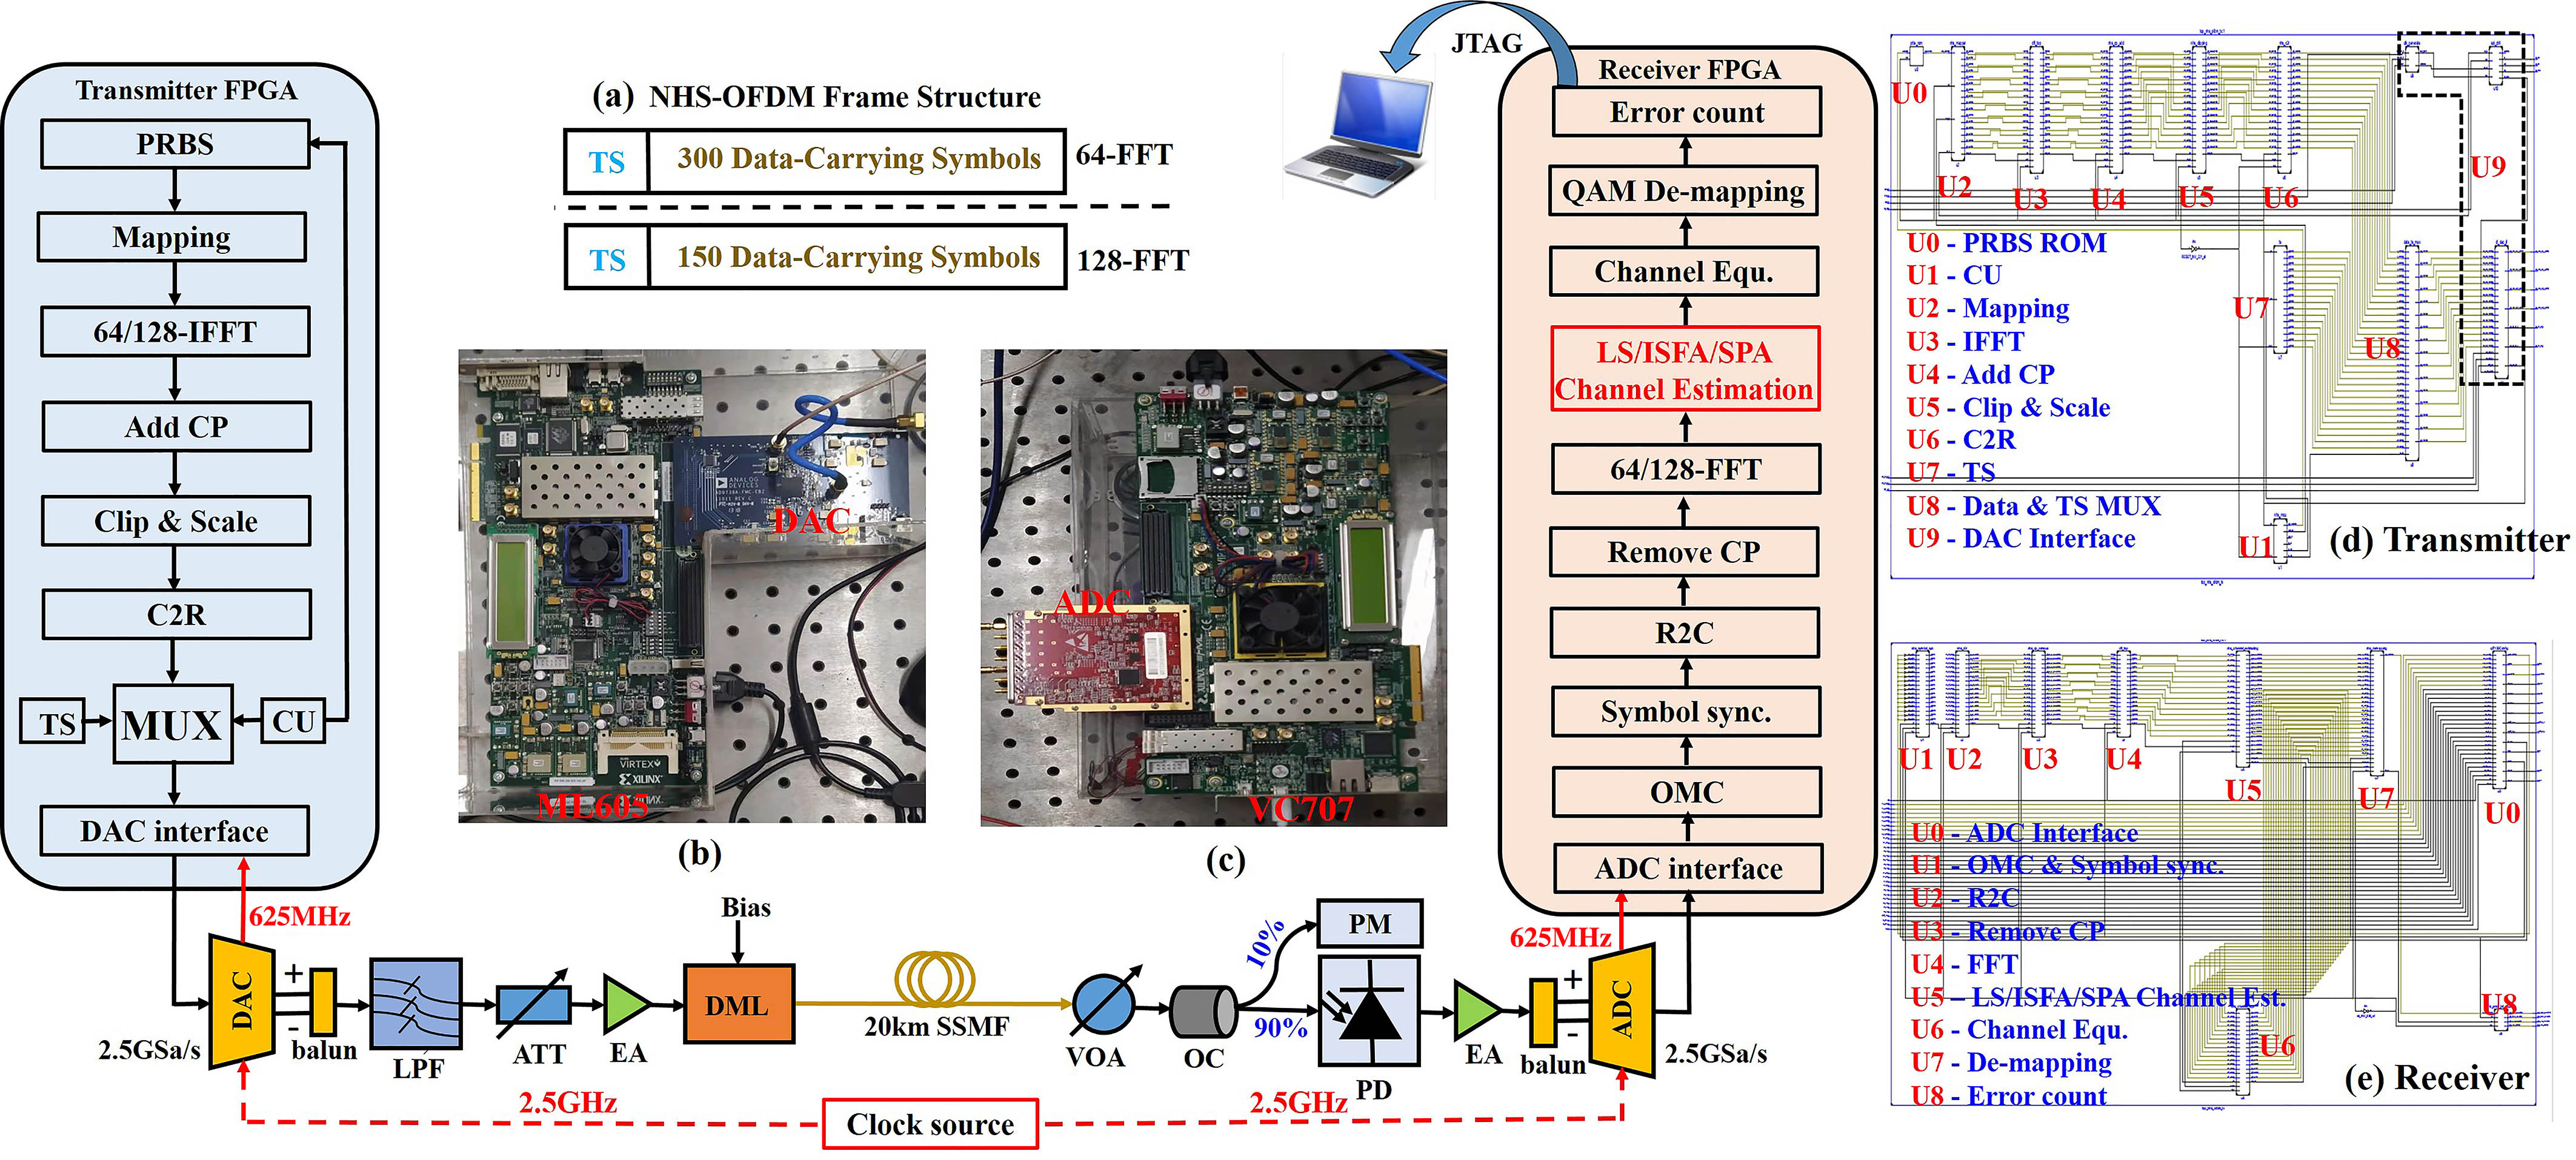 Experimental setup of the real-time NHS-OFDM transmission system with IMDD. Inset (a) is OFDM frame structure, (b), (c) are the baseband transceivers hardware platforms, and (d), (e) are the RTL schematics of the real-time NHS-OFDM transceiver.